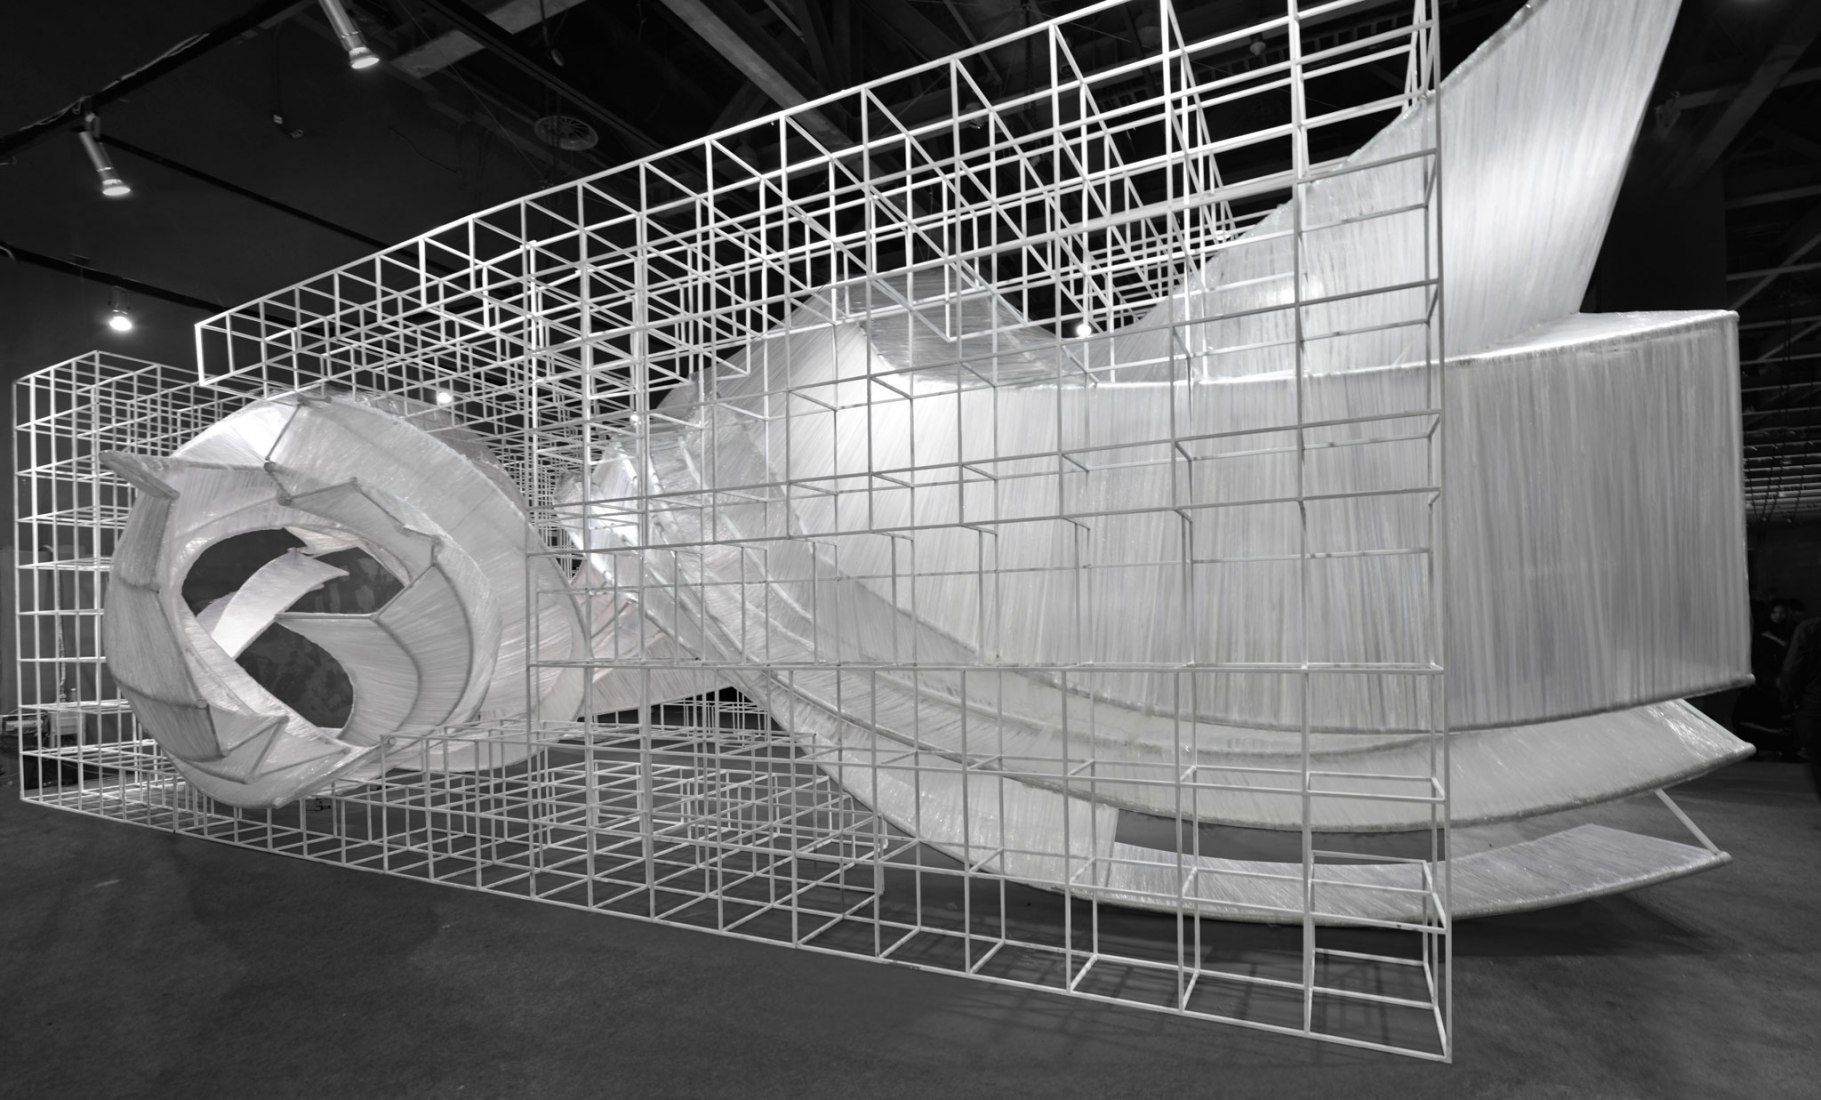 Transparent Shell by PONE ARCHITECTURE at Guangzhou Design Week. Image courtesy of v2com.